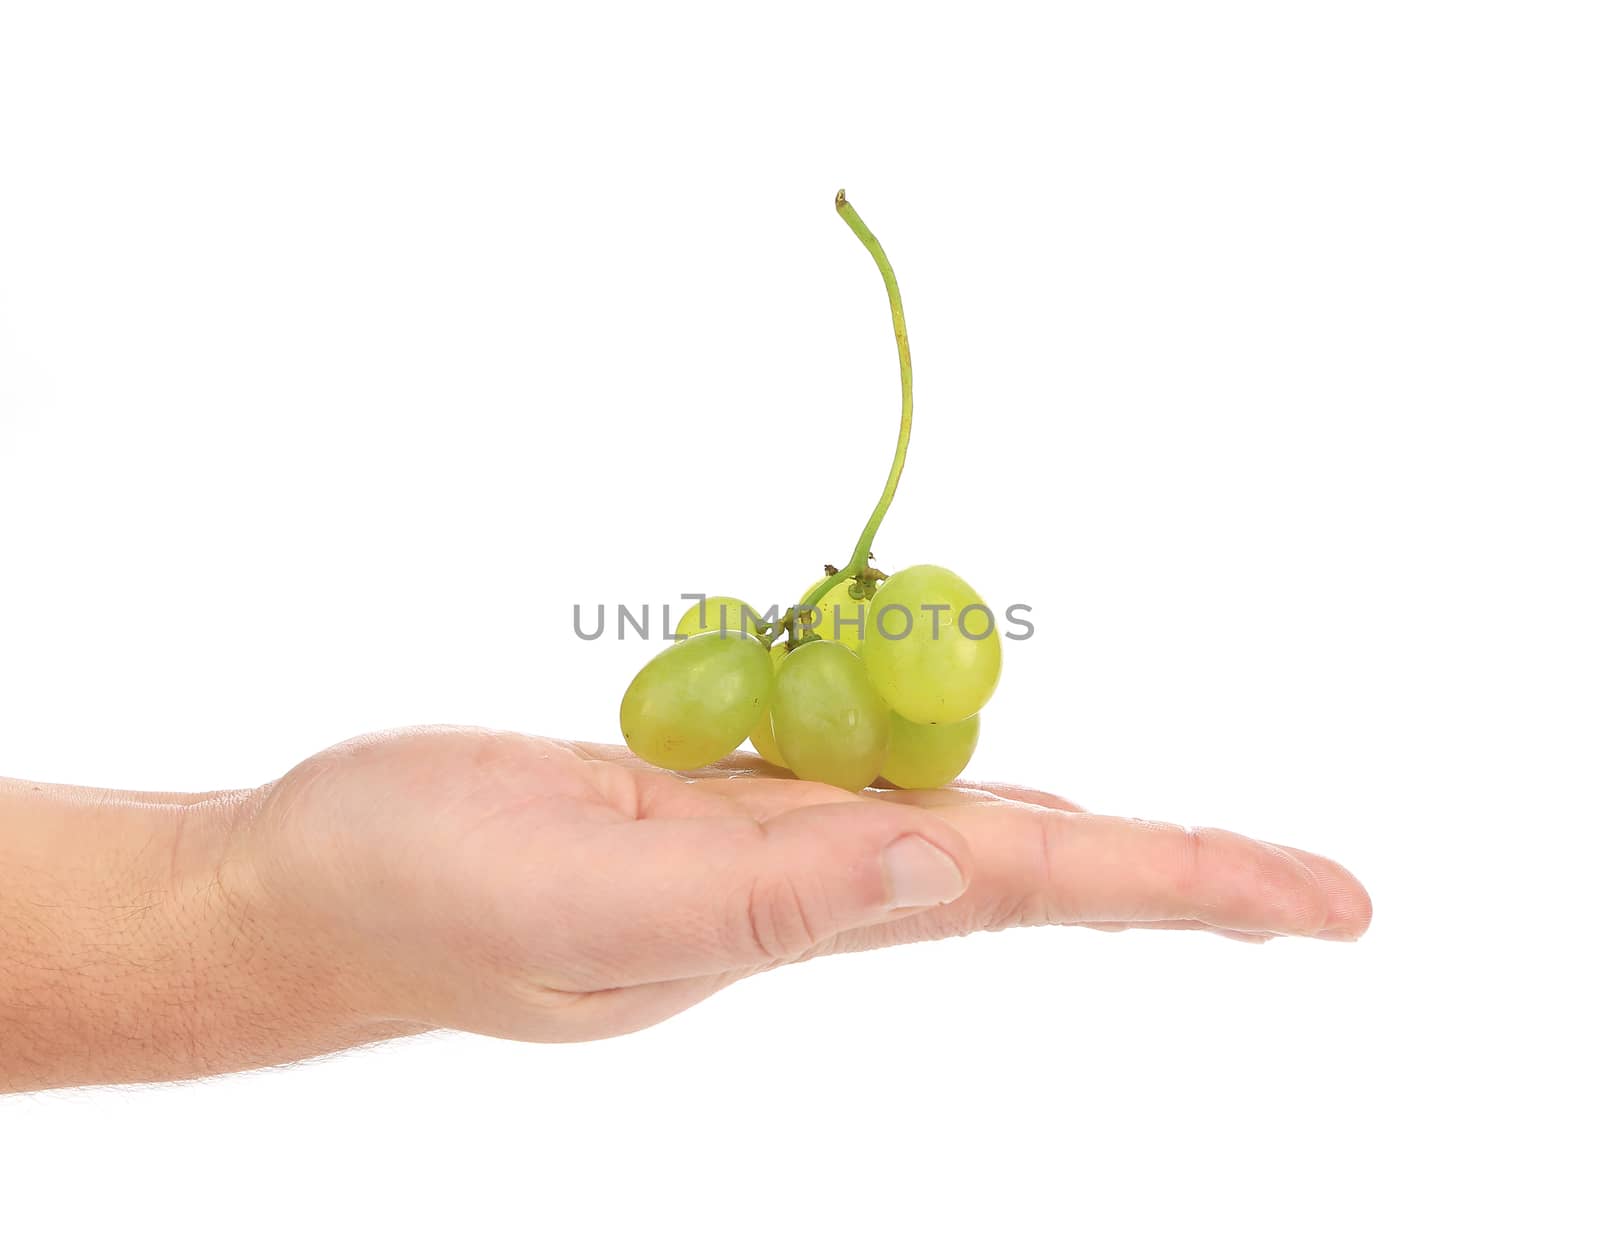 Bunch of white grapes on a hand. Isolated on a white background.